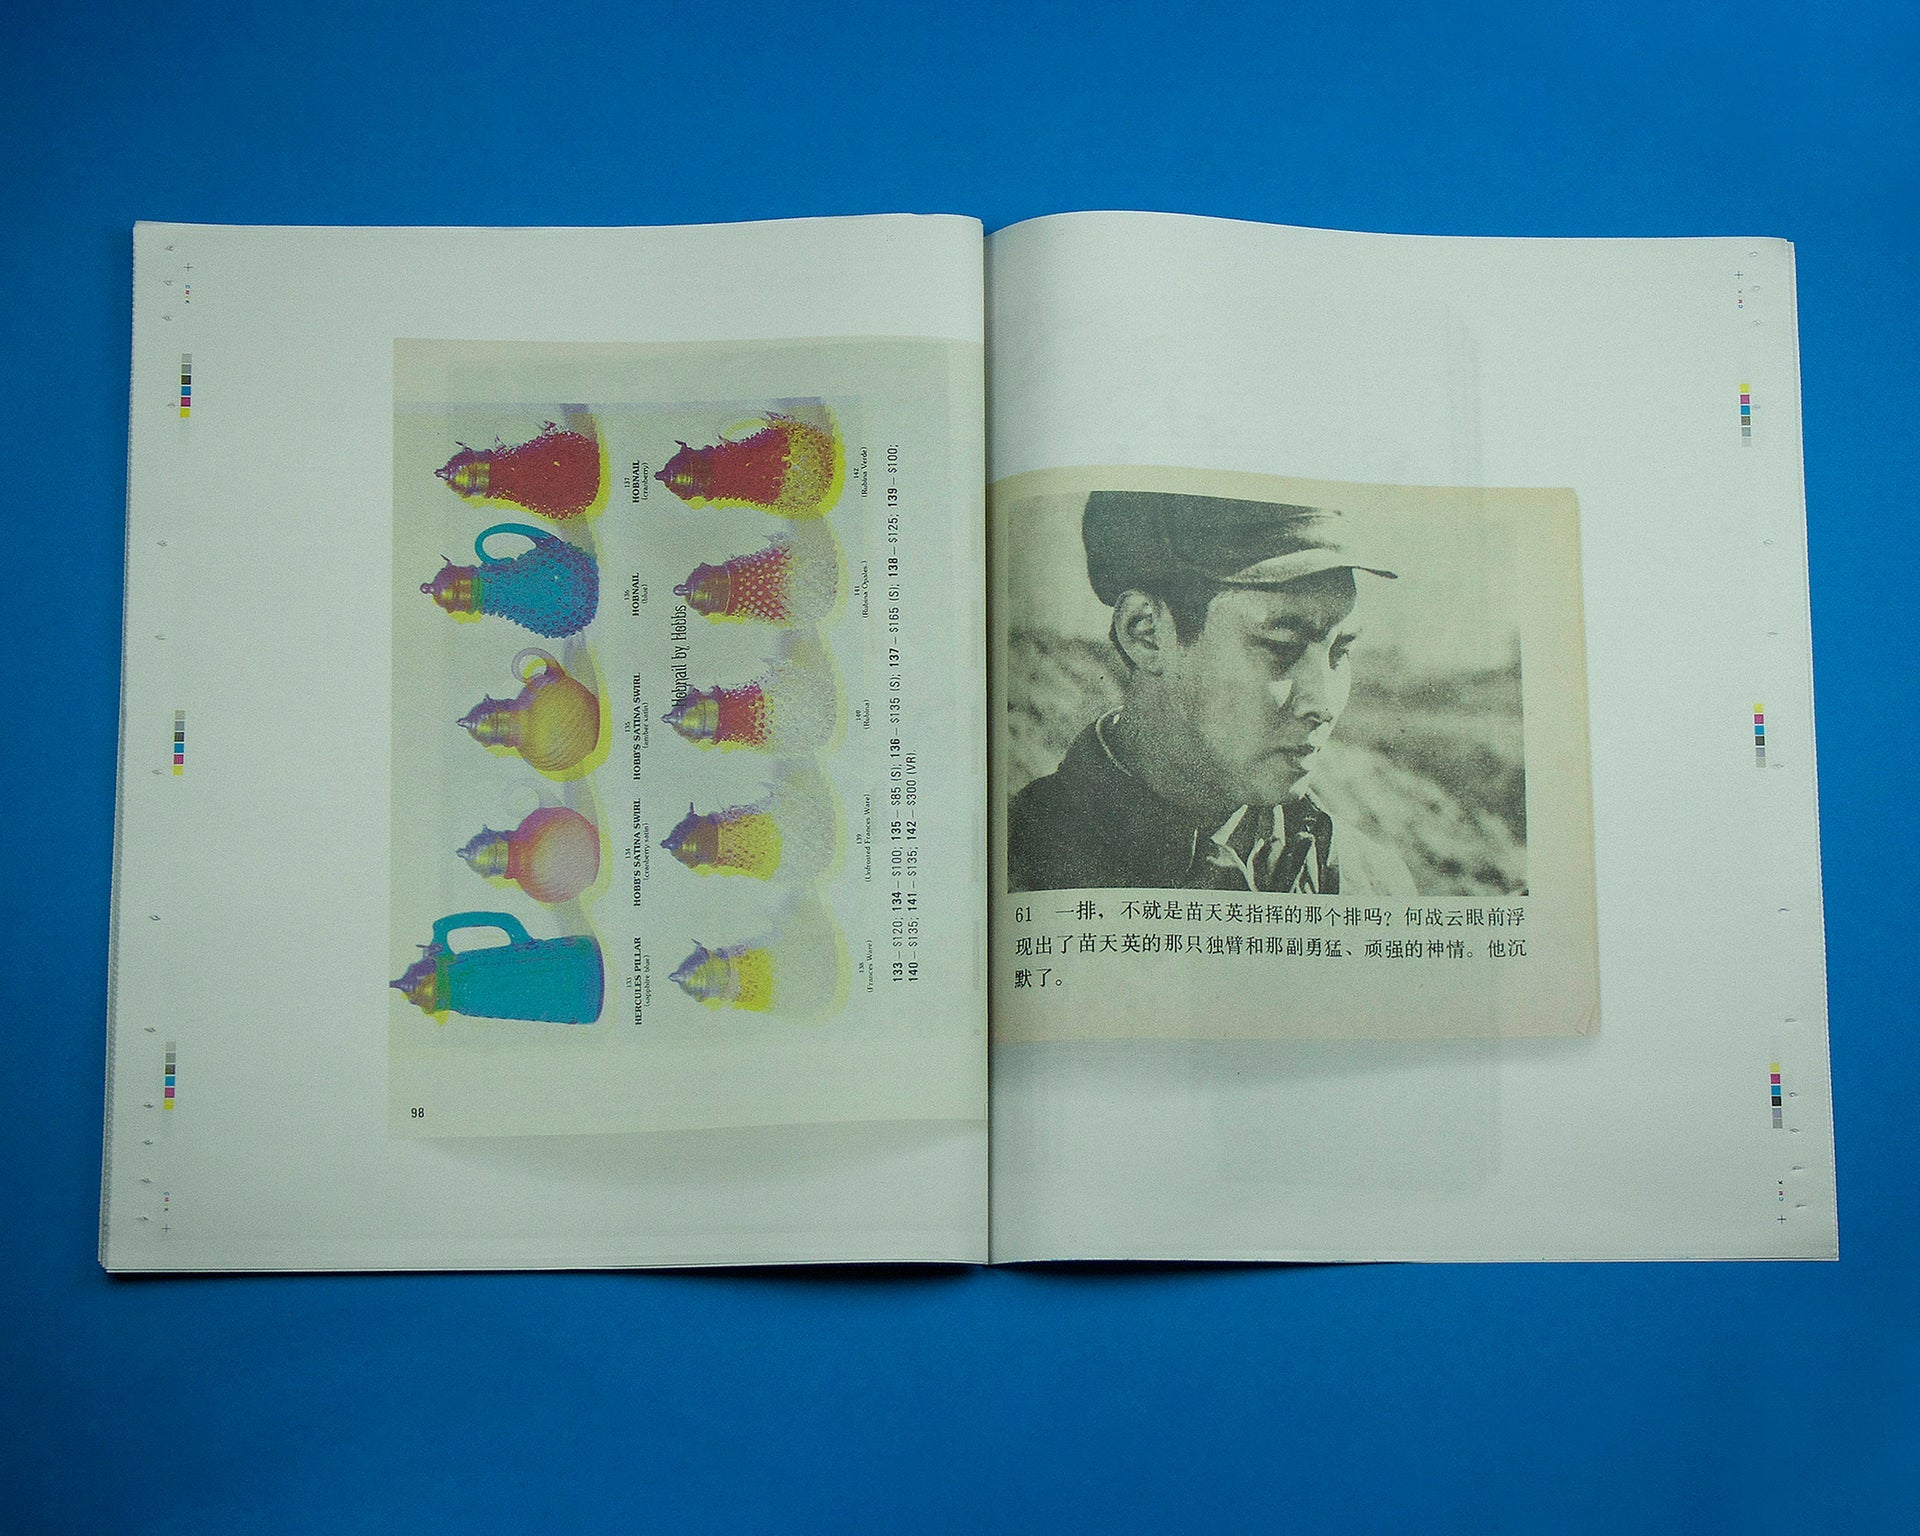 Incredibly small photobooks by Paul Kooker and Erik Kessels